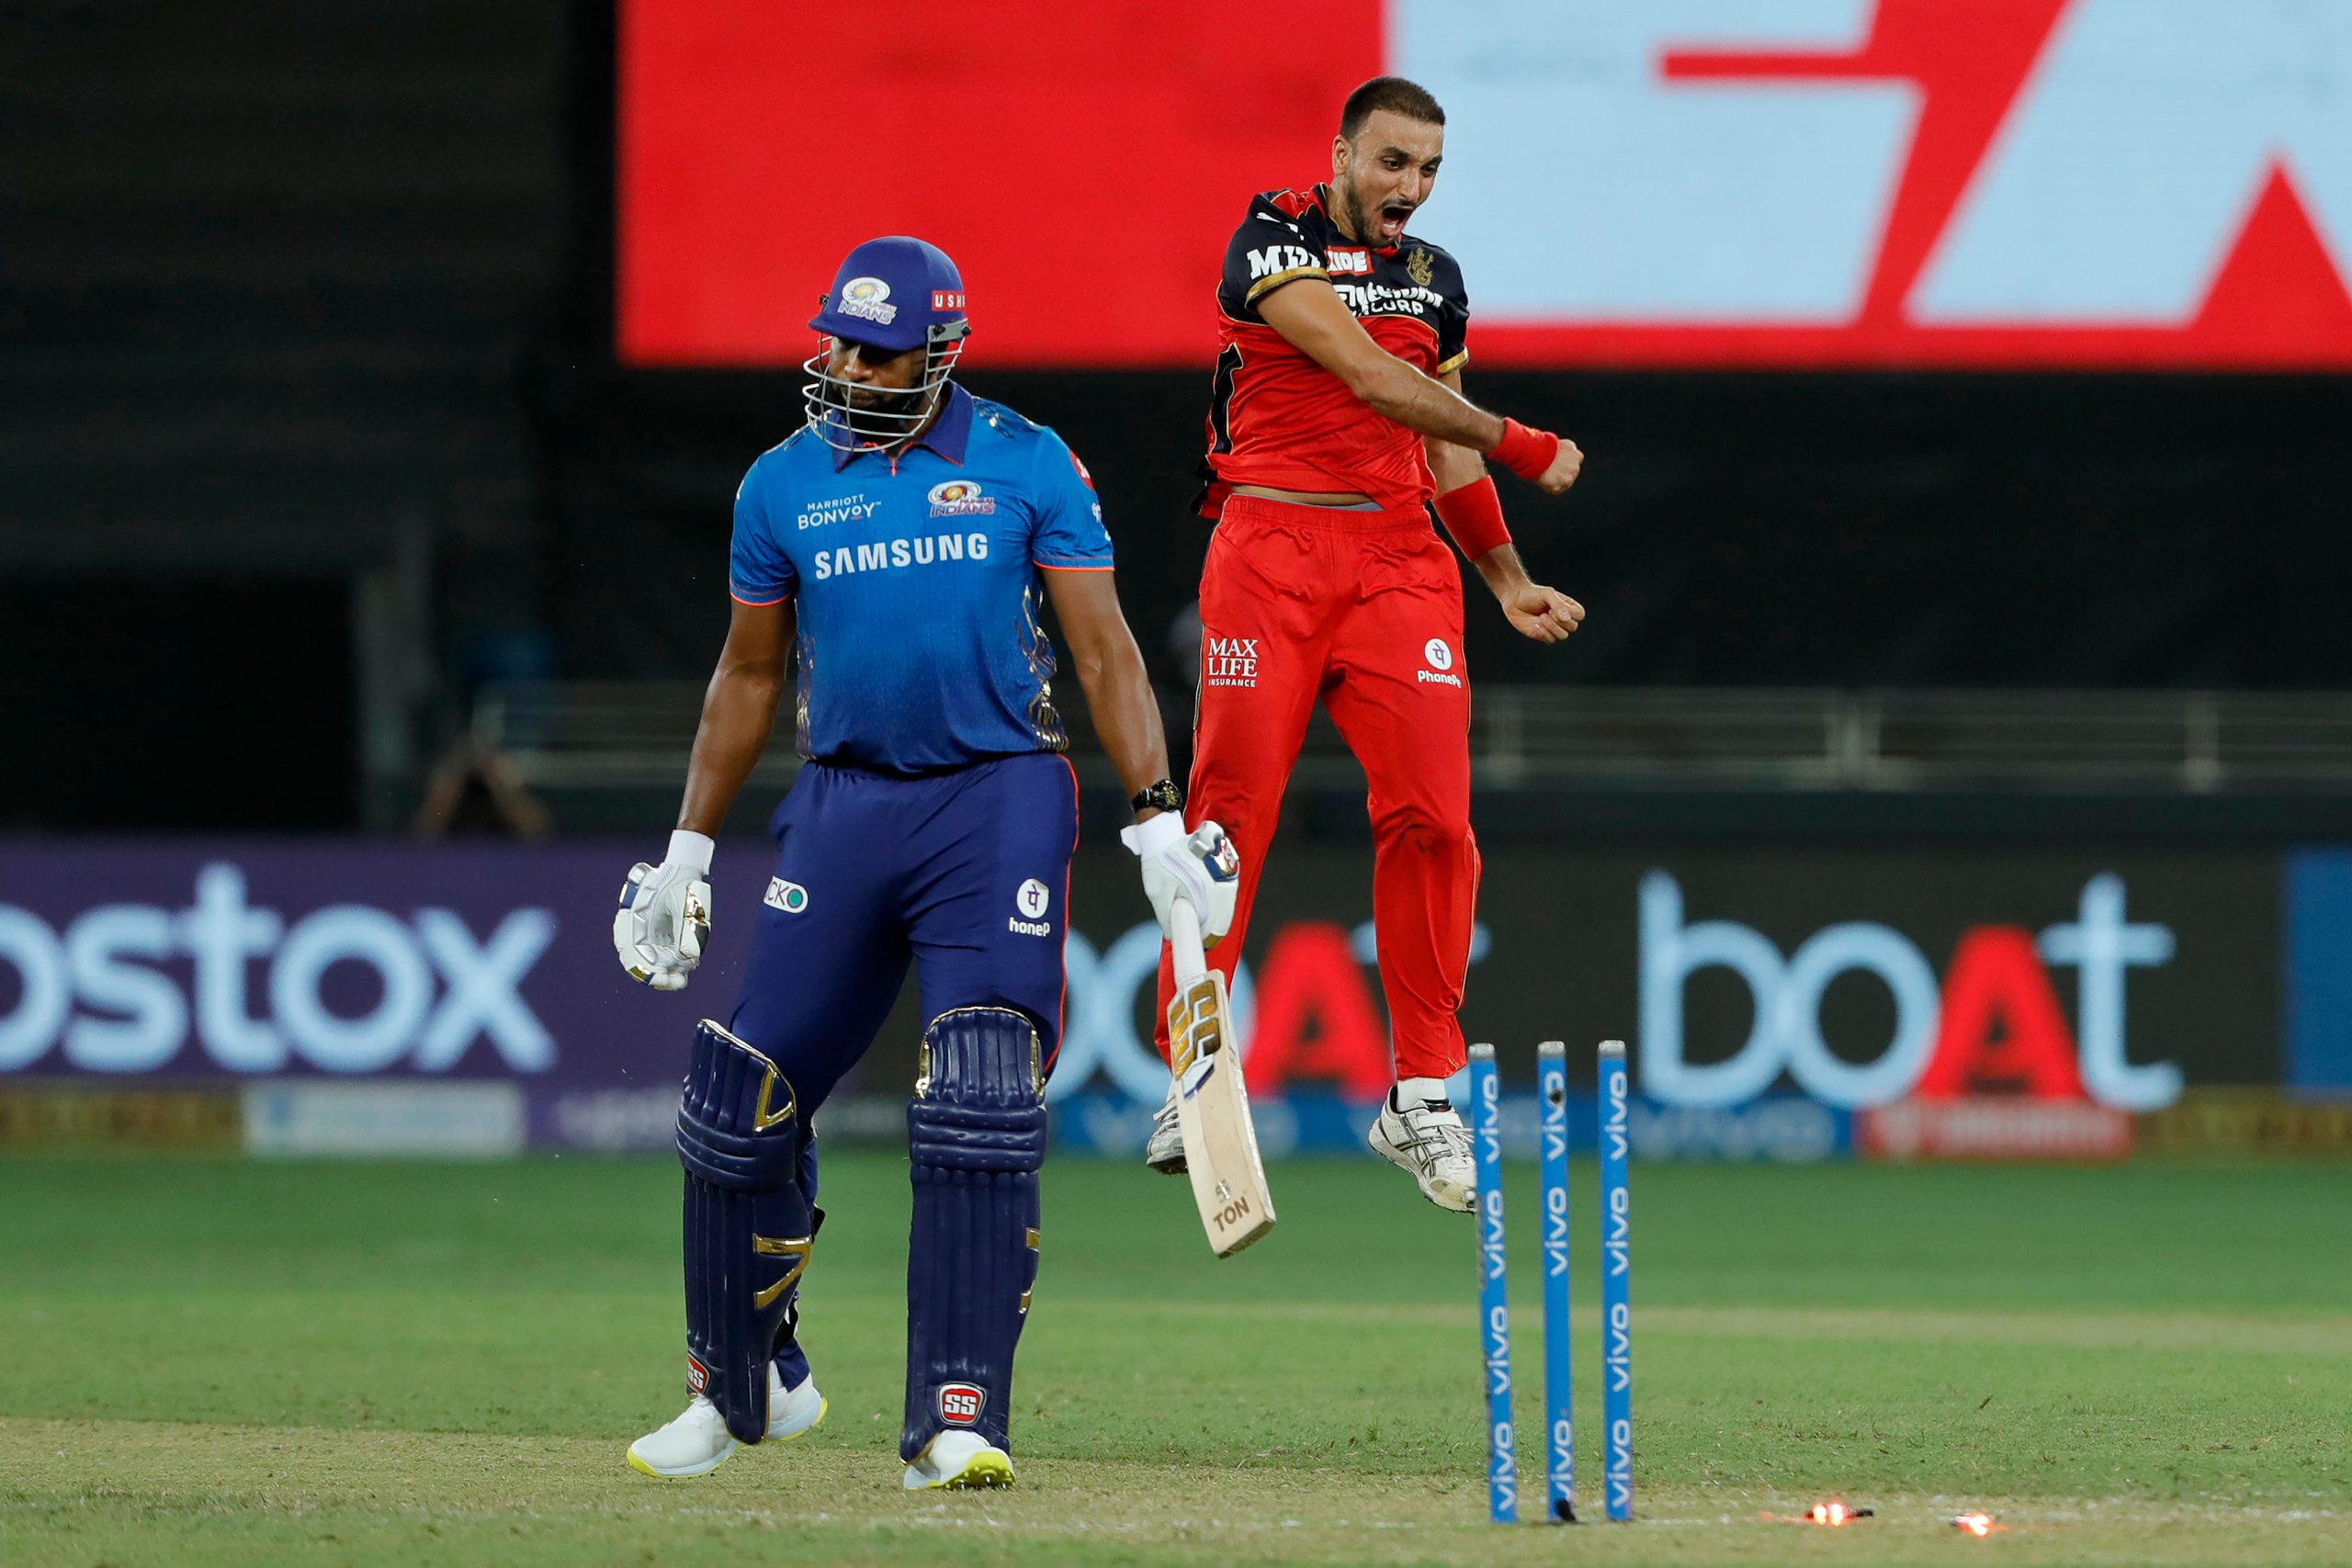 Harshal Patel hat-trick: Full list of players to achieve the feat in IPL